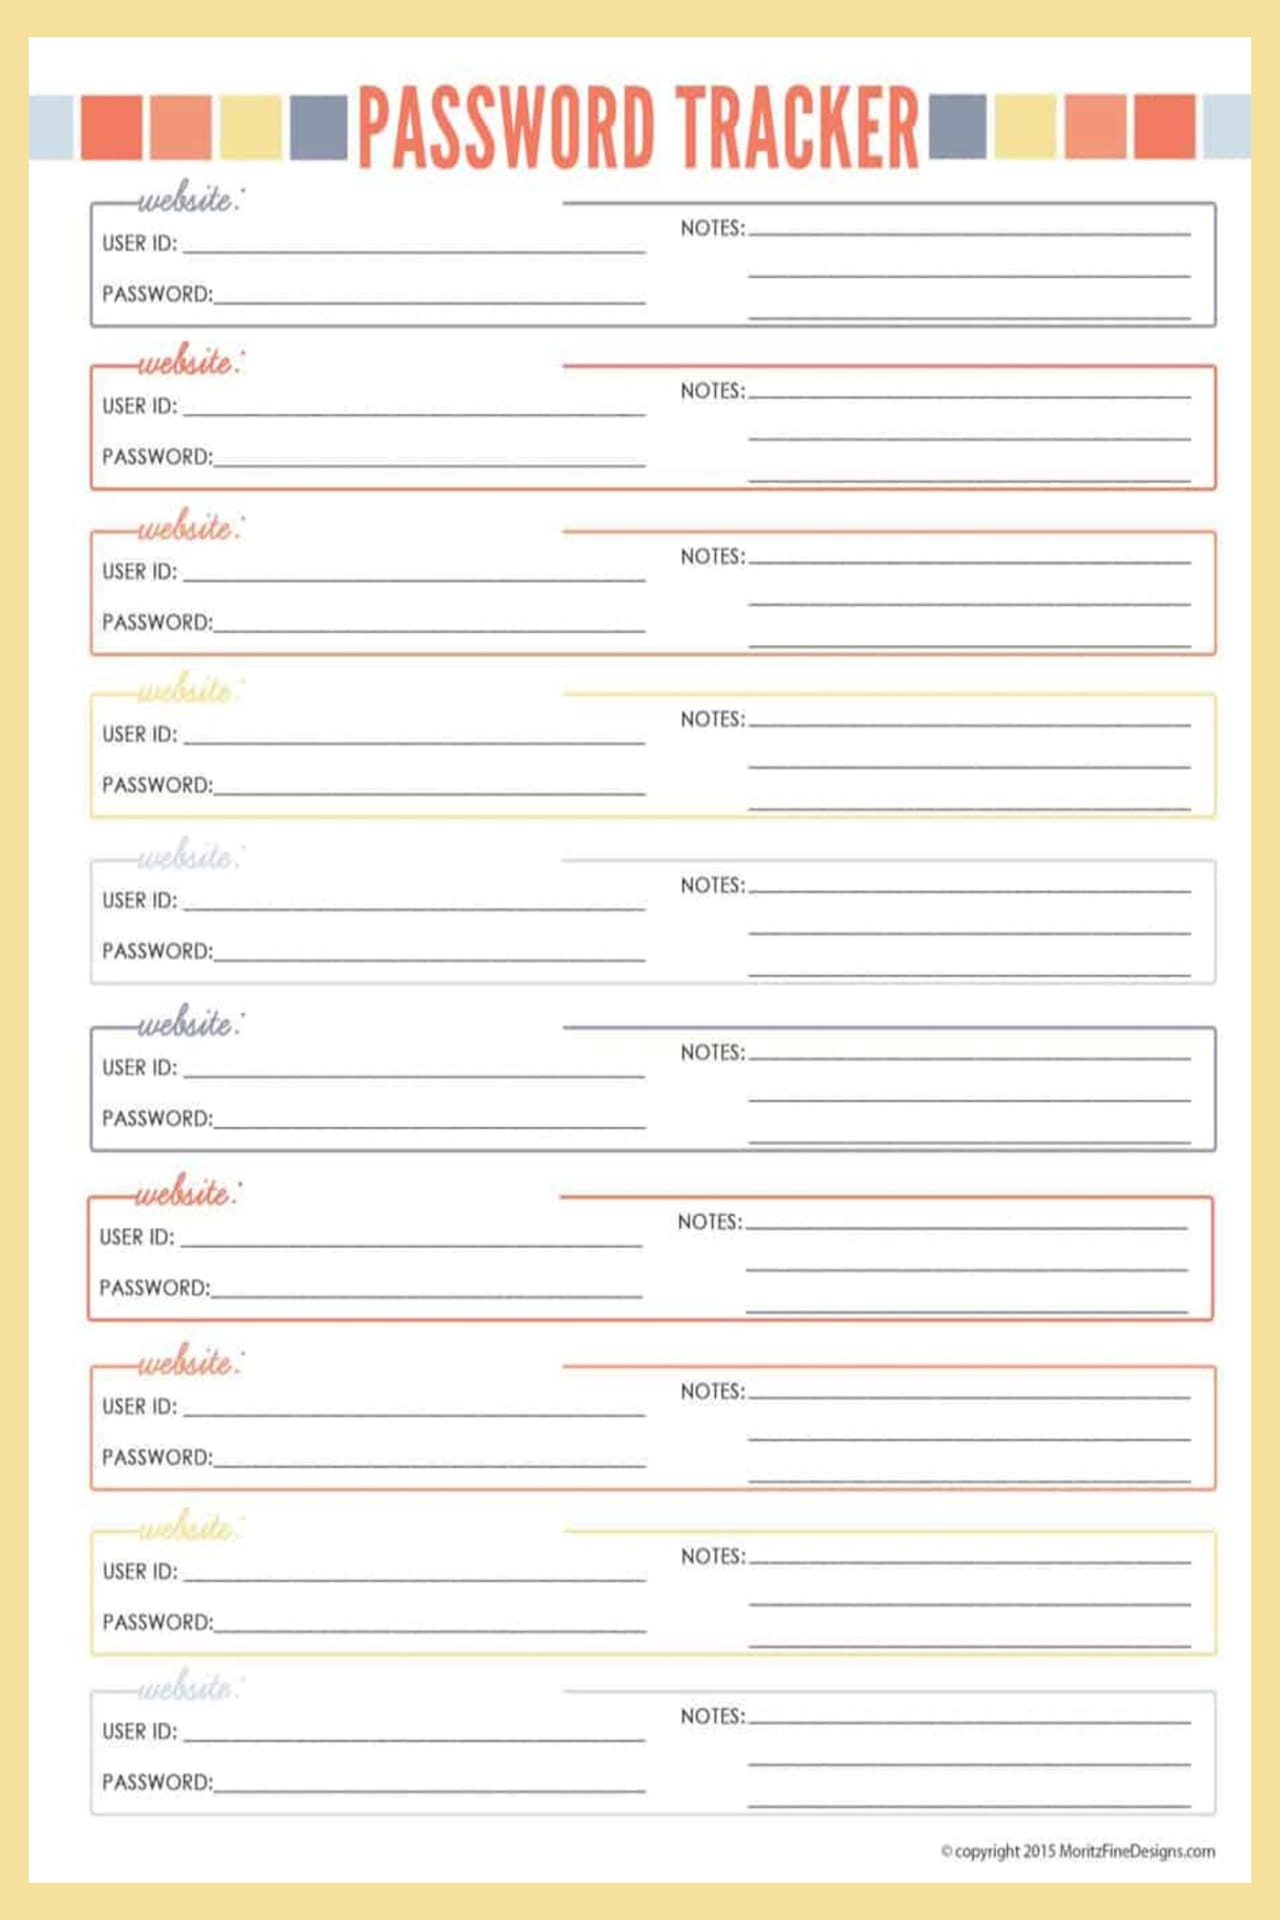 Internet Password Organizer - Free Password Logs and Password Keeper Printable PDFs - how to organize website passwords on paper with a printable password keeper to make a DIY password journal or password organizer binder - it's like your own password vault to track all your online passwords!  Download your free printable password organizers worksheets to make a DIY password book with these free home organizing printables